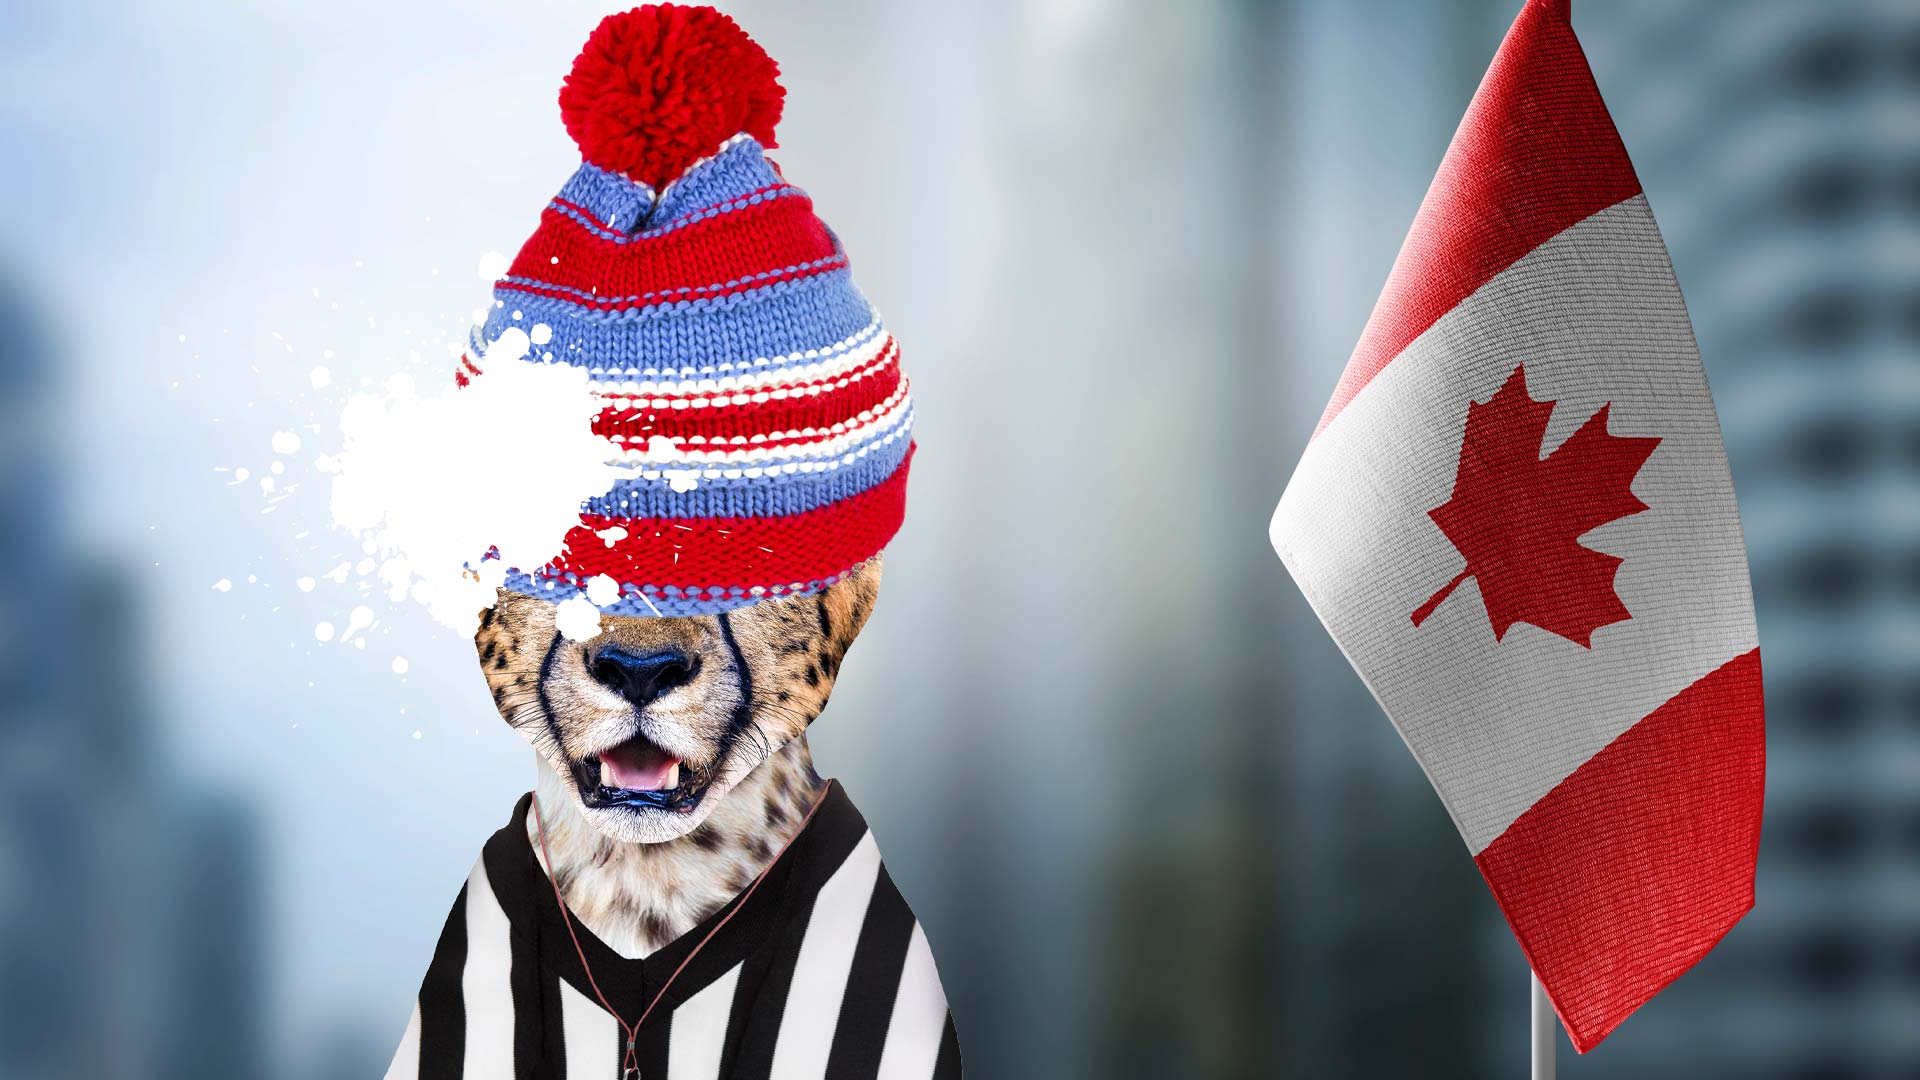 A football referee wearing a woolly hat next to a Canada flag